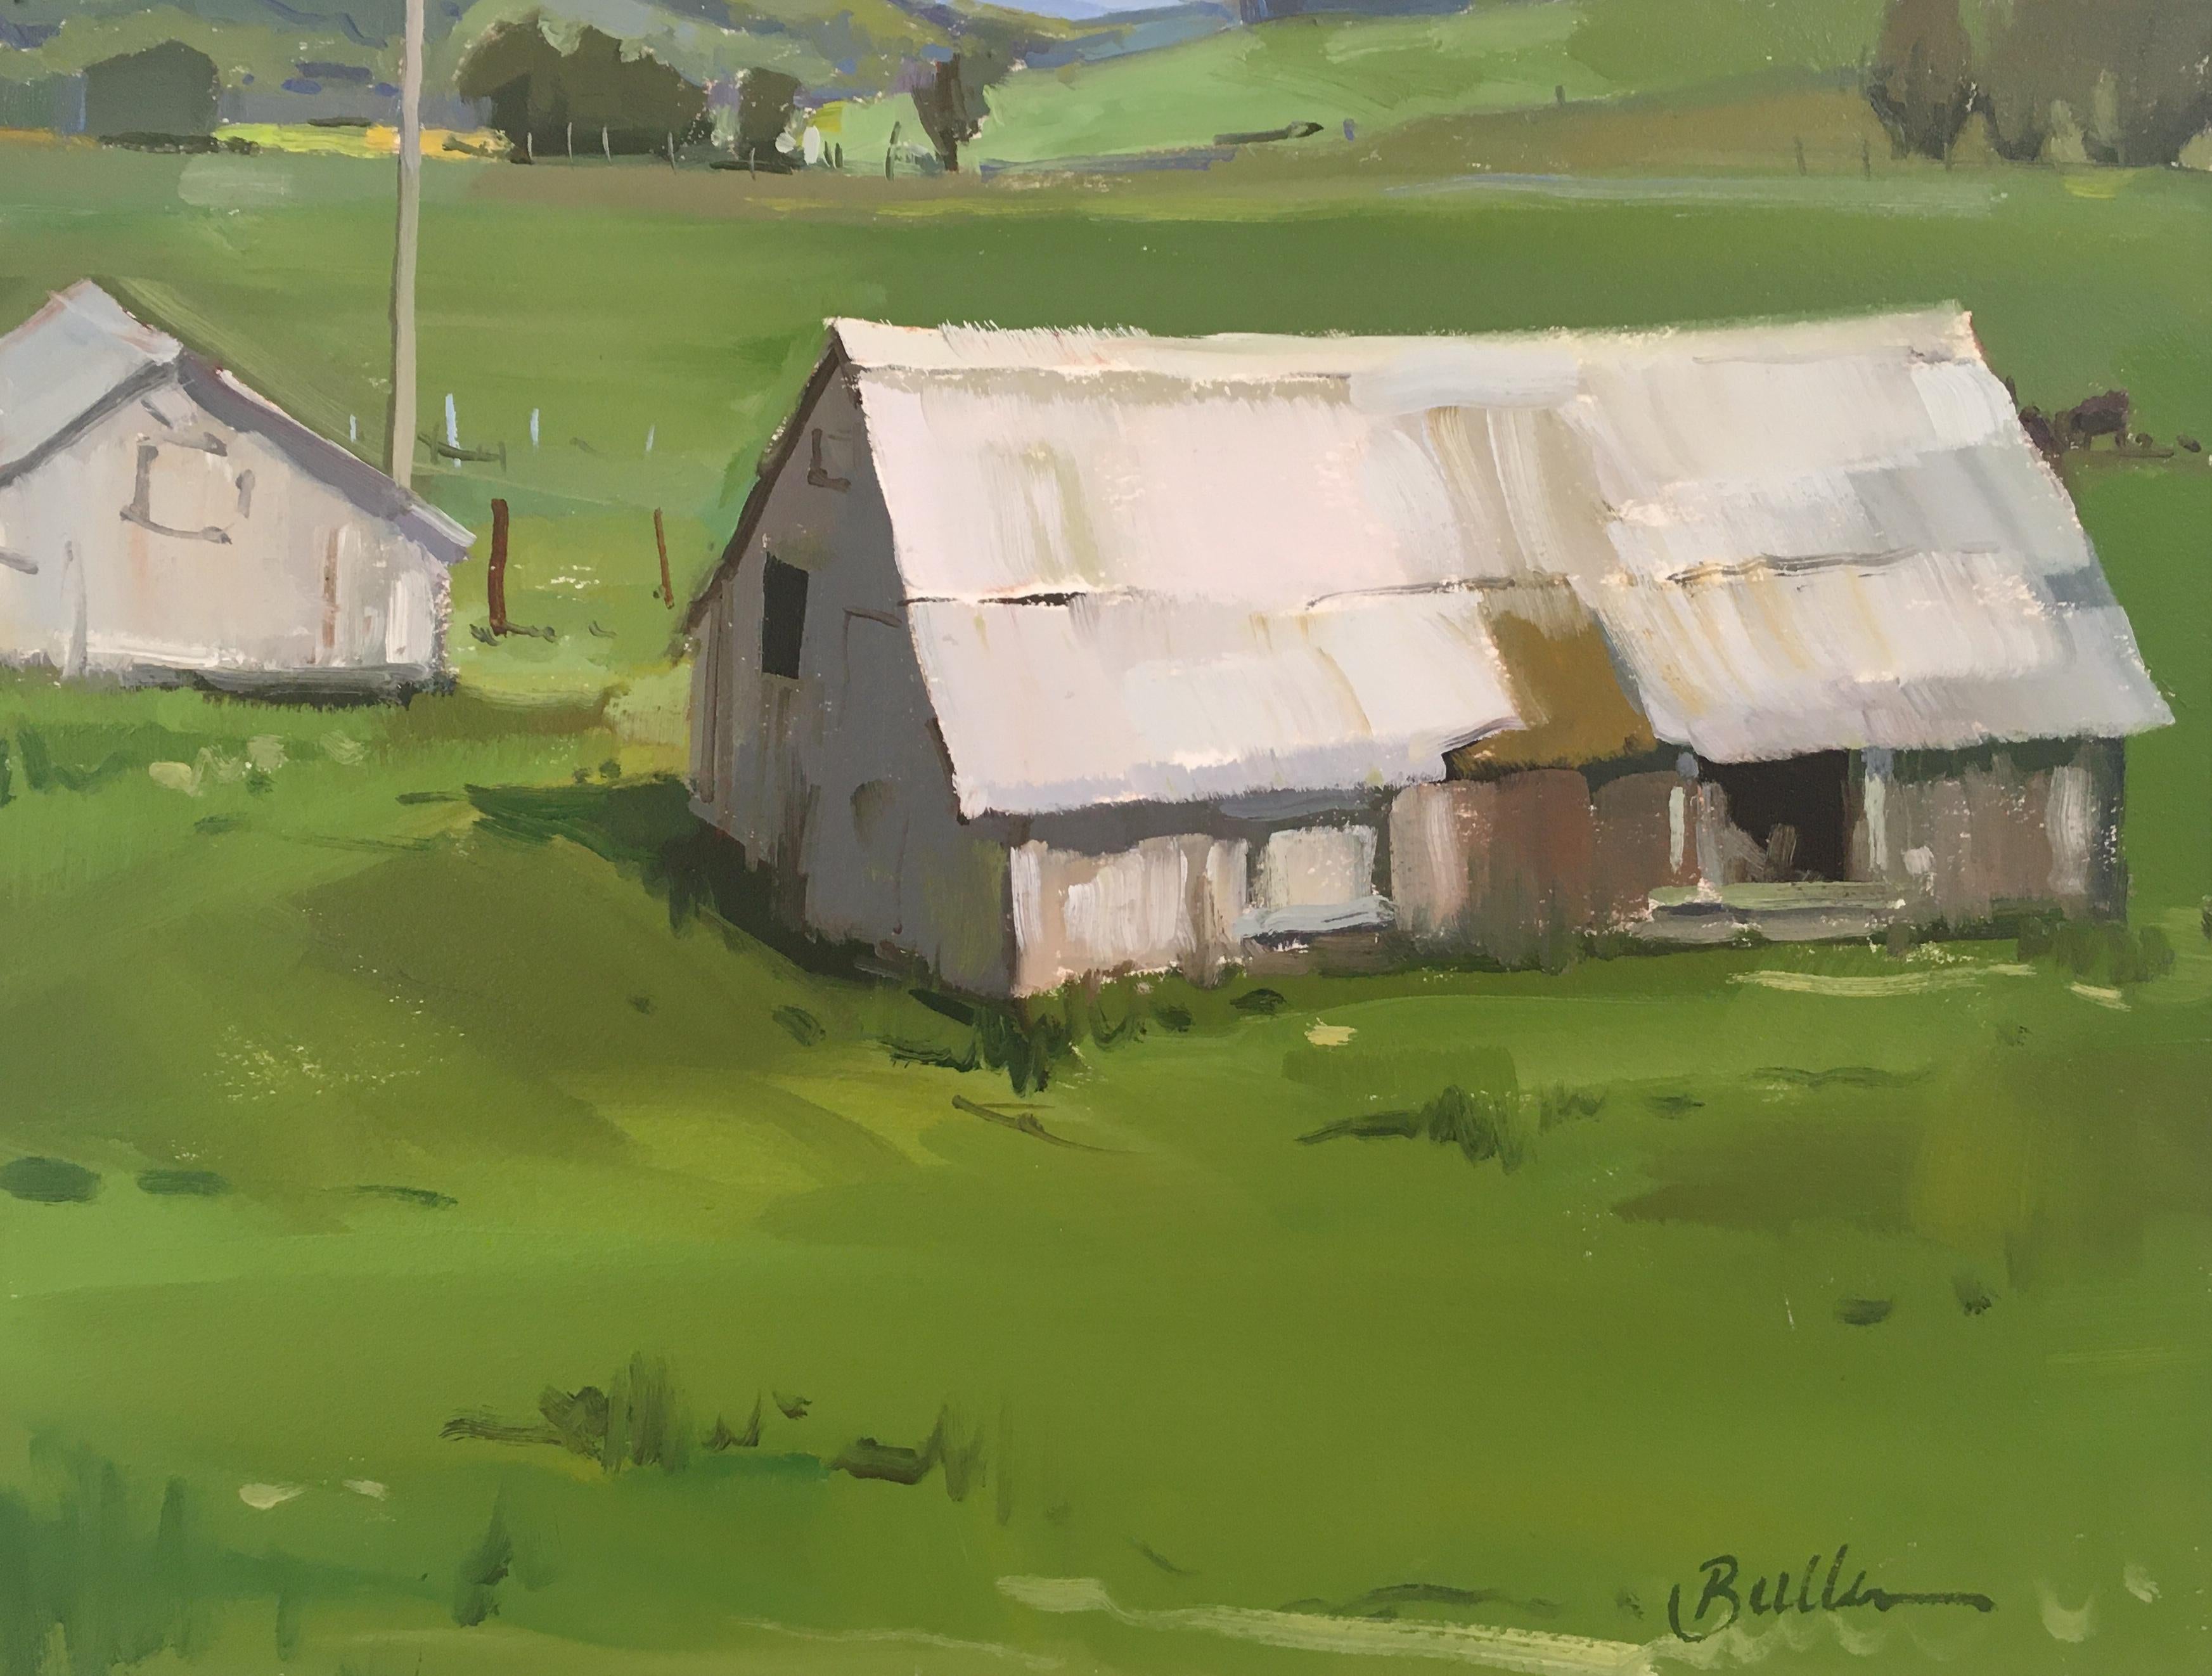 Samantha Buller Landscape Painting - "Old Chicken Barn" Oil Painting